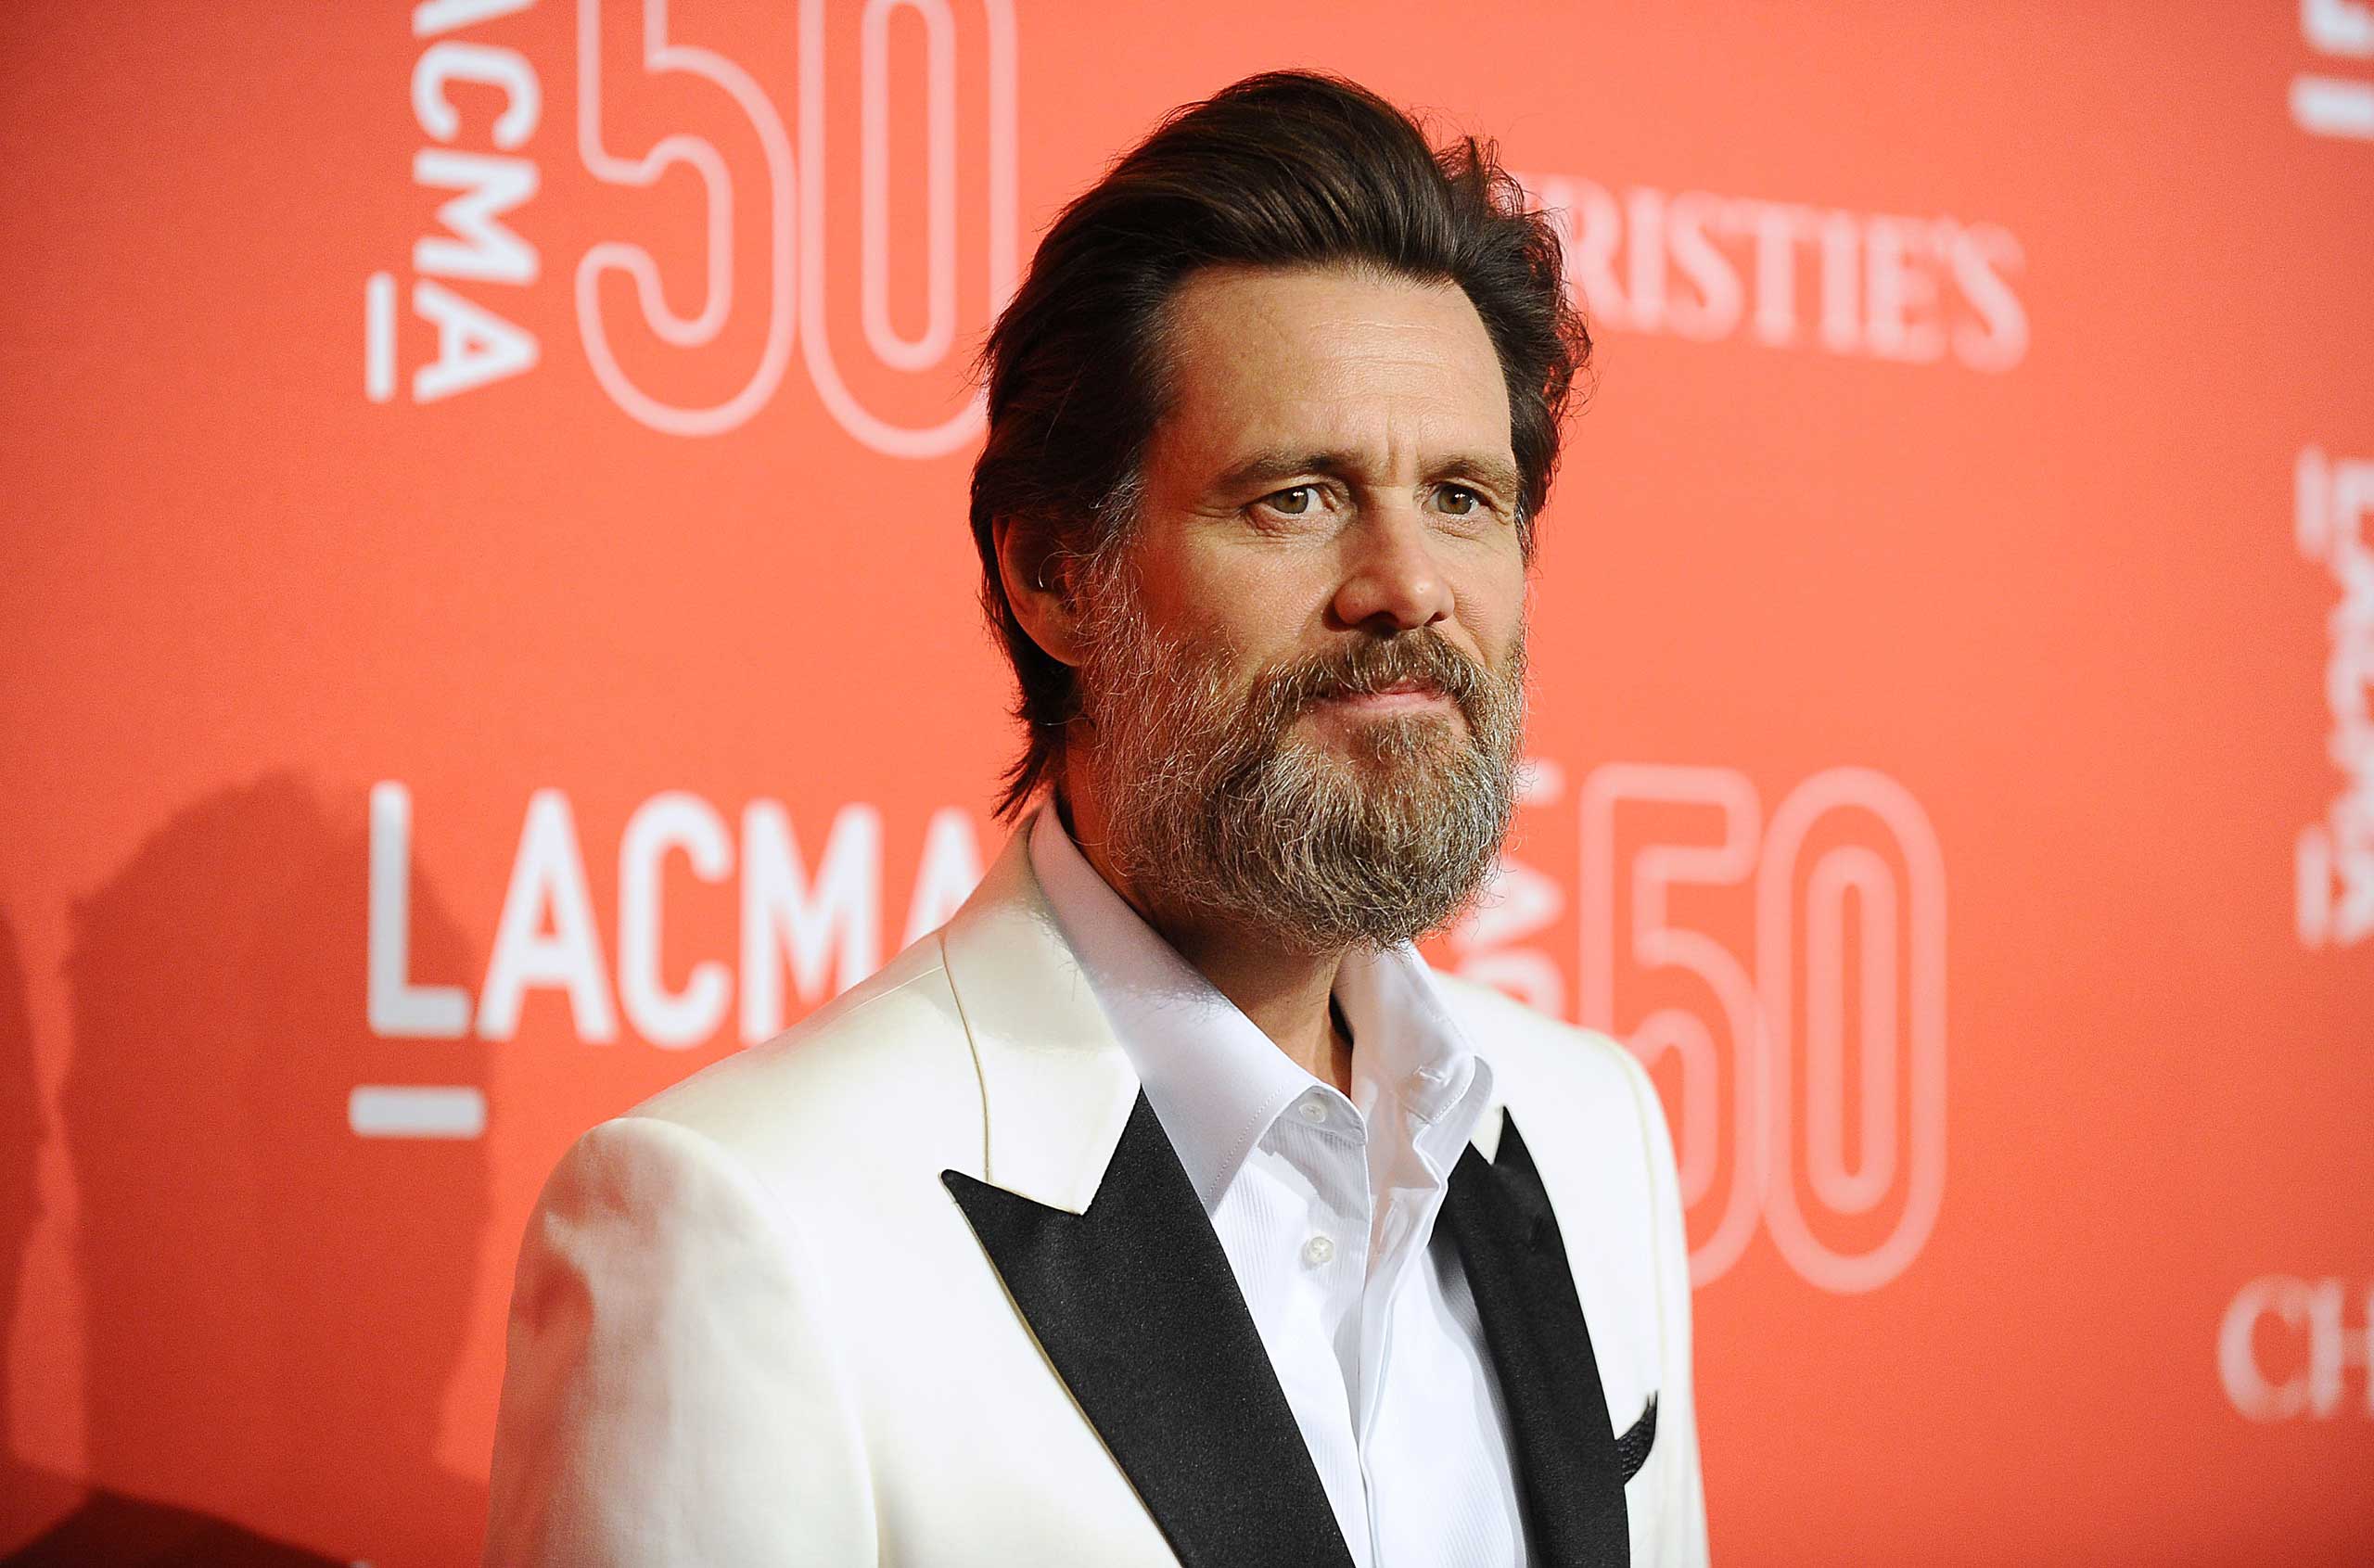 Actor Jim Carrey attends LACMA's 50th anniversary gala at LACMA in Los Angeles on April 18, 2015. (Jason LaVeris—FilmMagic/Getty Images)